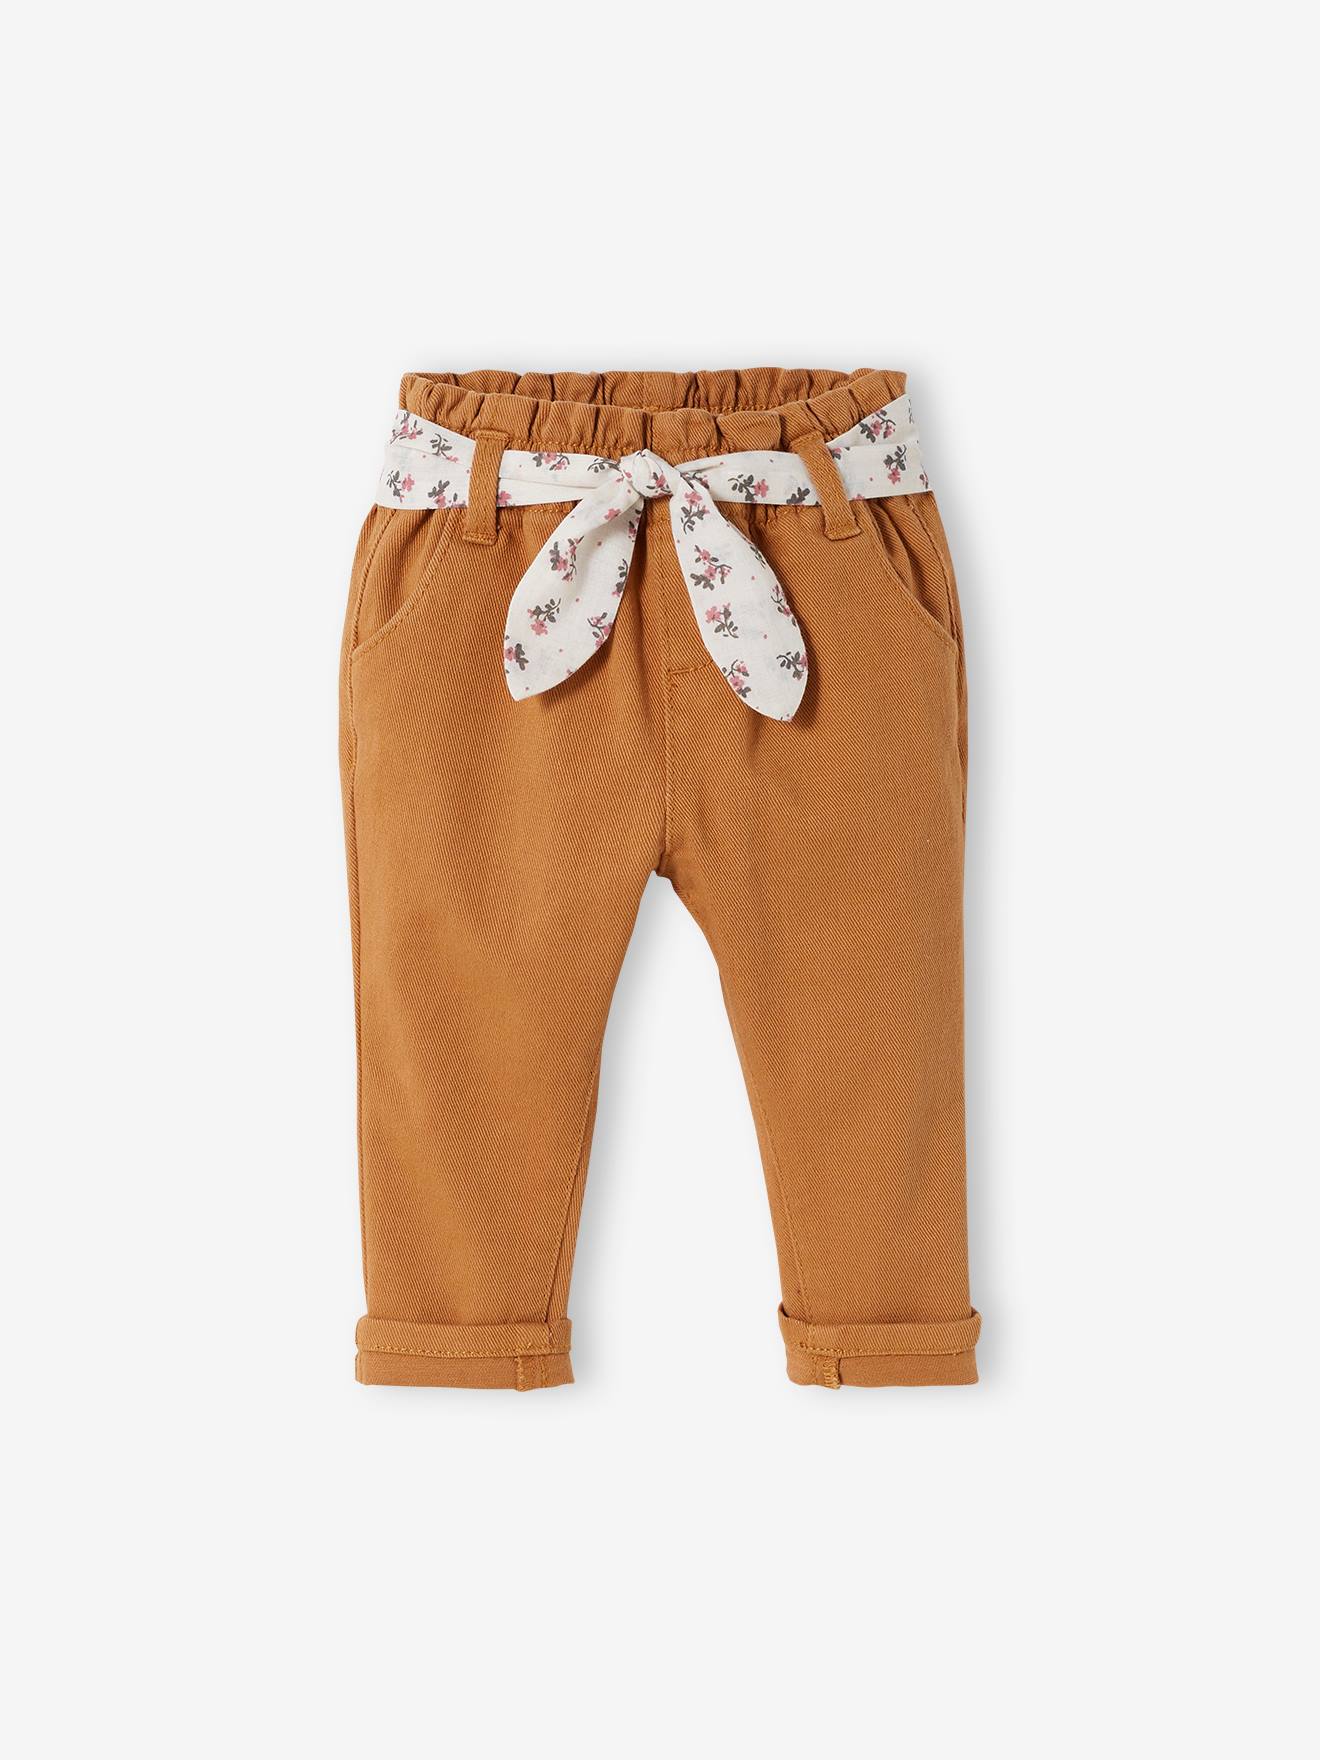 Trousers with Fabric Belt for Babies  brown medium solid with design Baby